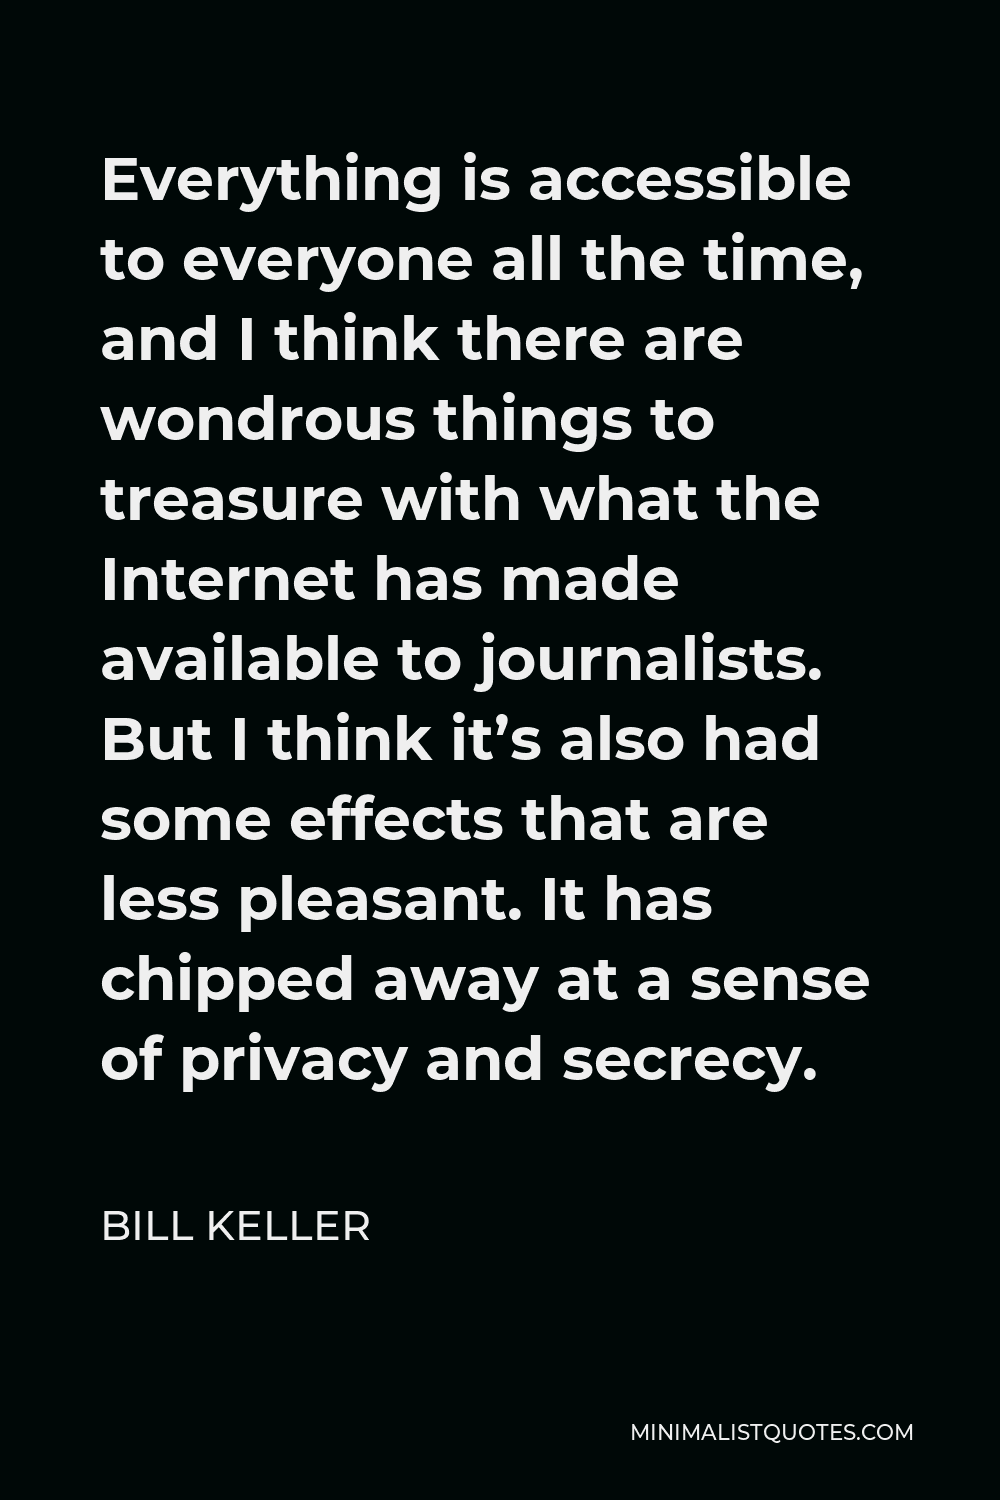 Bill Keller Quote - Everything is accessible to everyone all the time, and I think there are wondrous things to treasure with what the Internet has made available to journalists. But I think it’s also had some effects that are less pleasant. It has chipped away at a sense of privacy and secrecy.